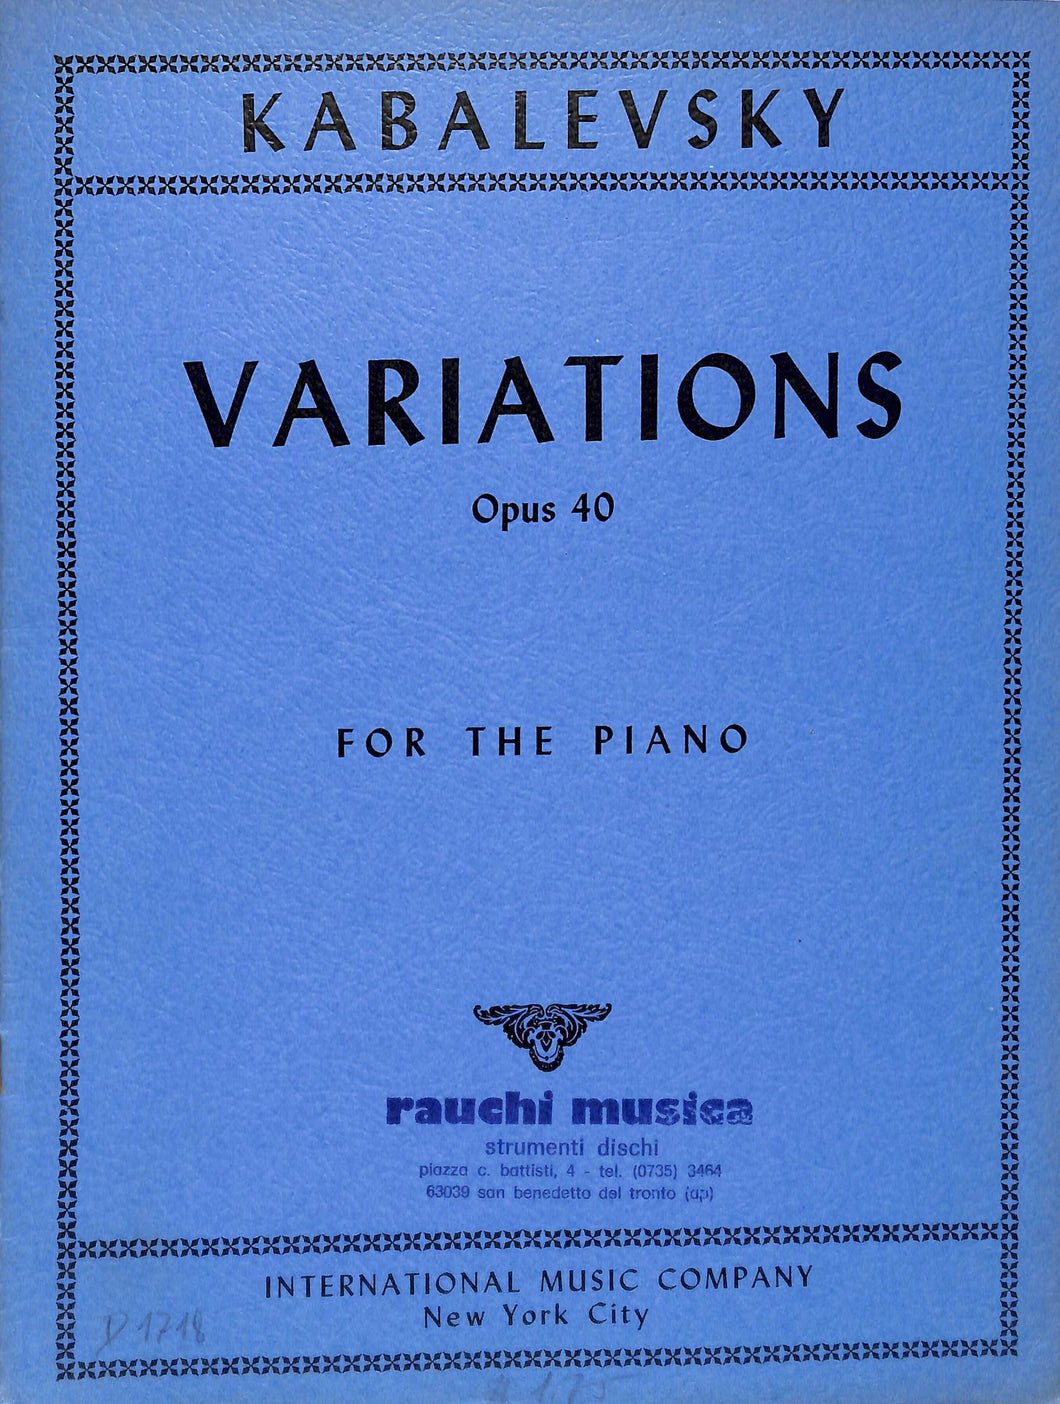 Kabalevsky Variations Opus 40 For The Piano